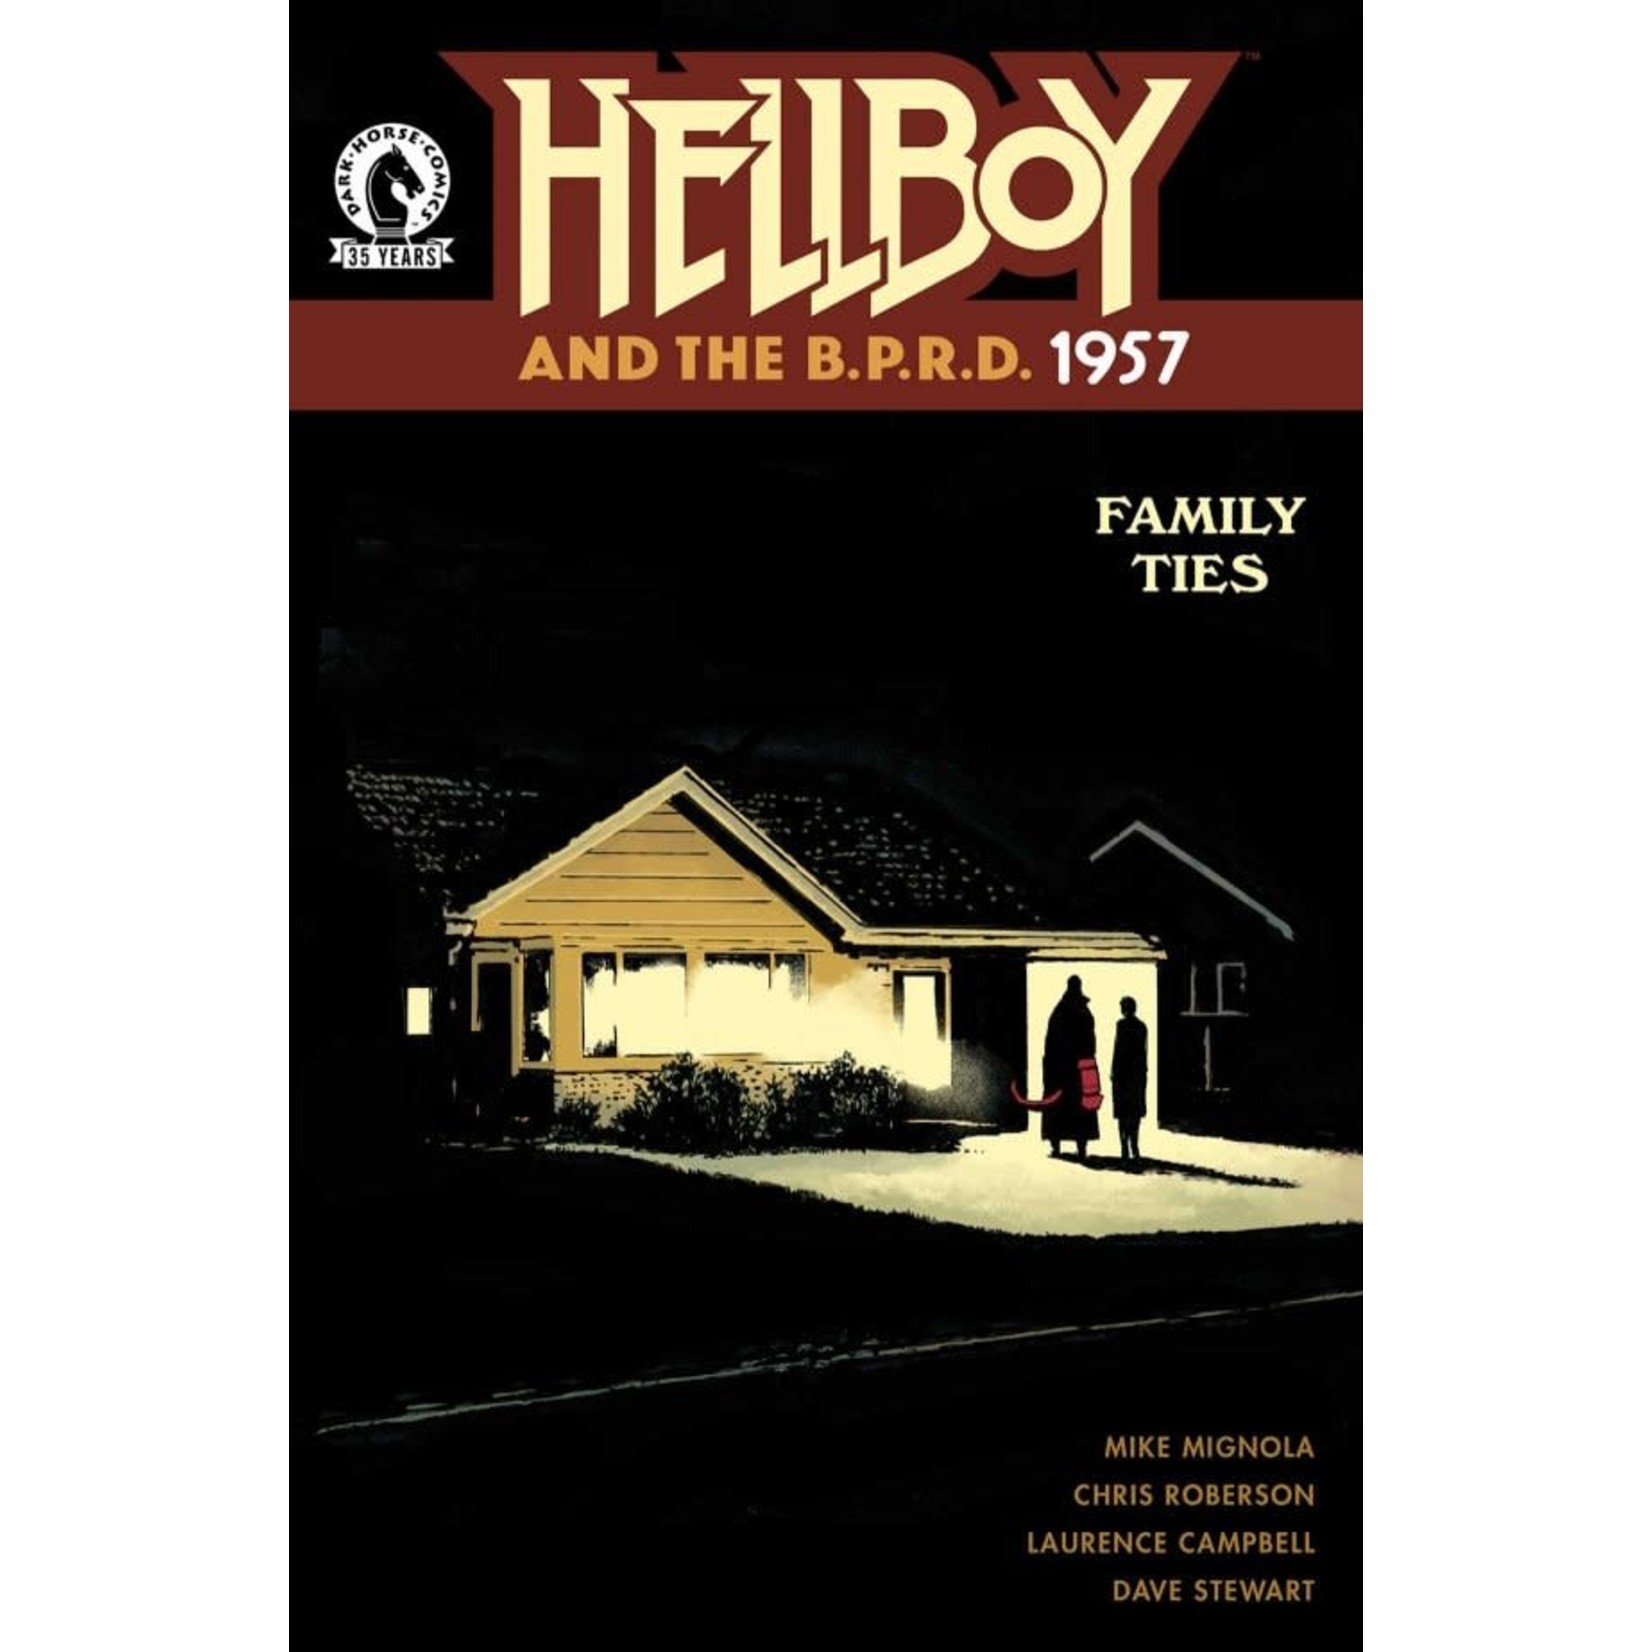 DARK HORSE COMICS Hellboy and the B.P.R.D.: 1957 - Family Ties #1